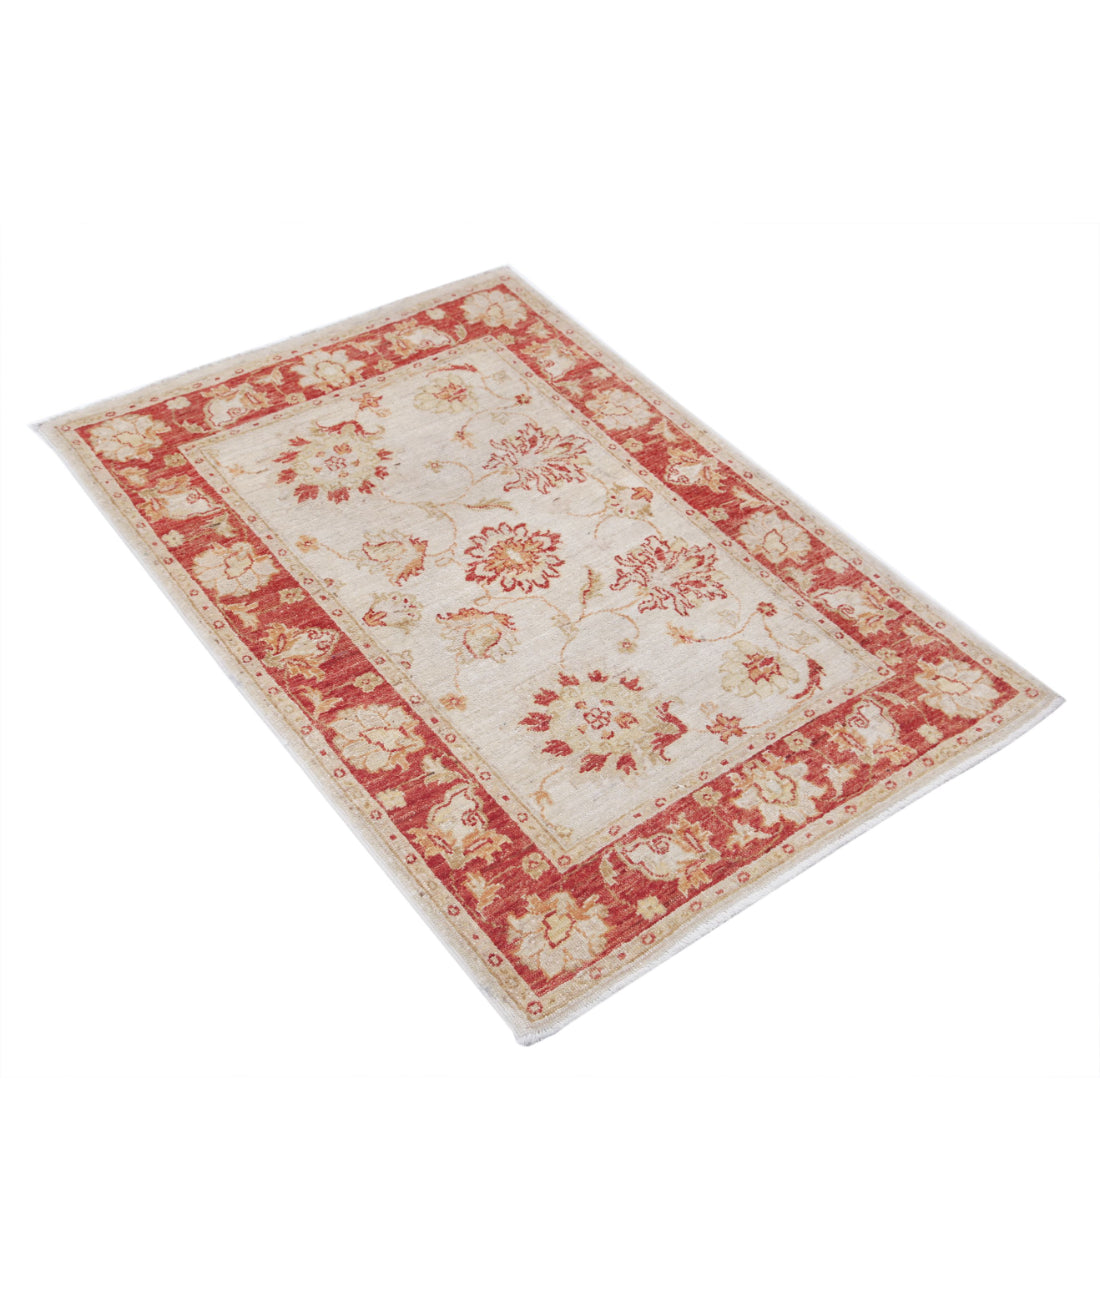 Ziegler 2'9'' X 3'10'' Hand-Knotted Wool Rug 2'9'' x 3'10'' (83 X 115) / Ivory / Red